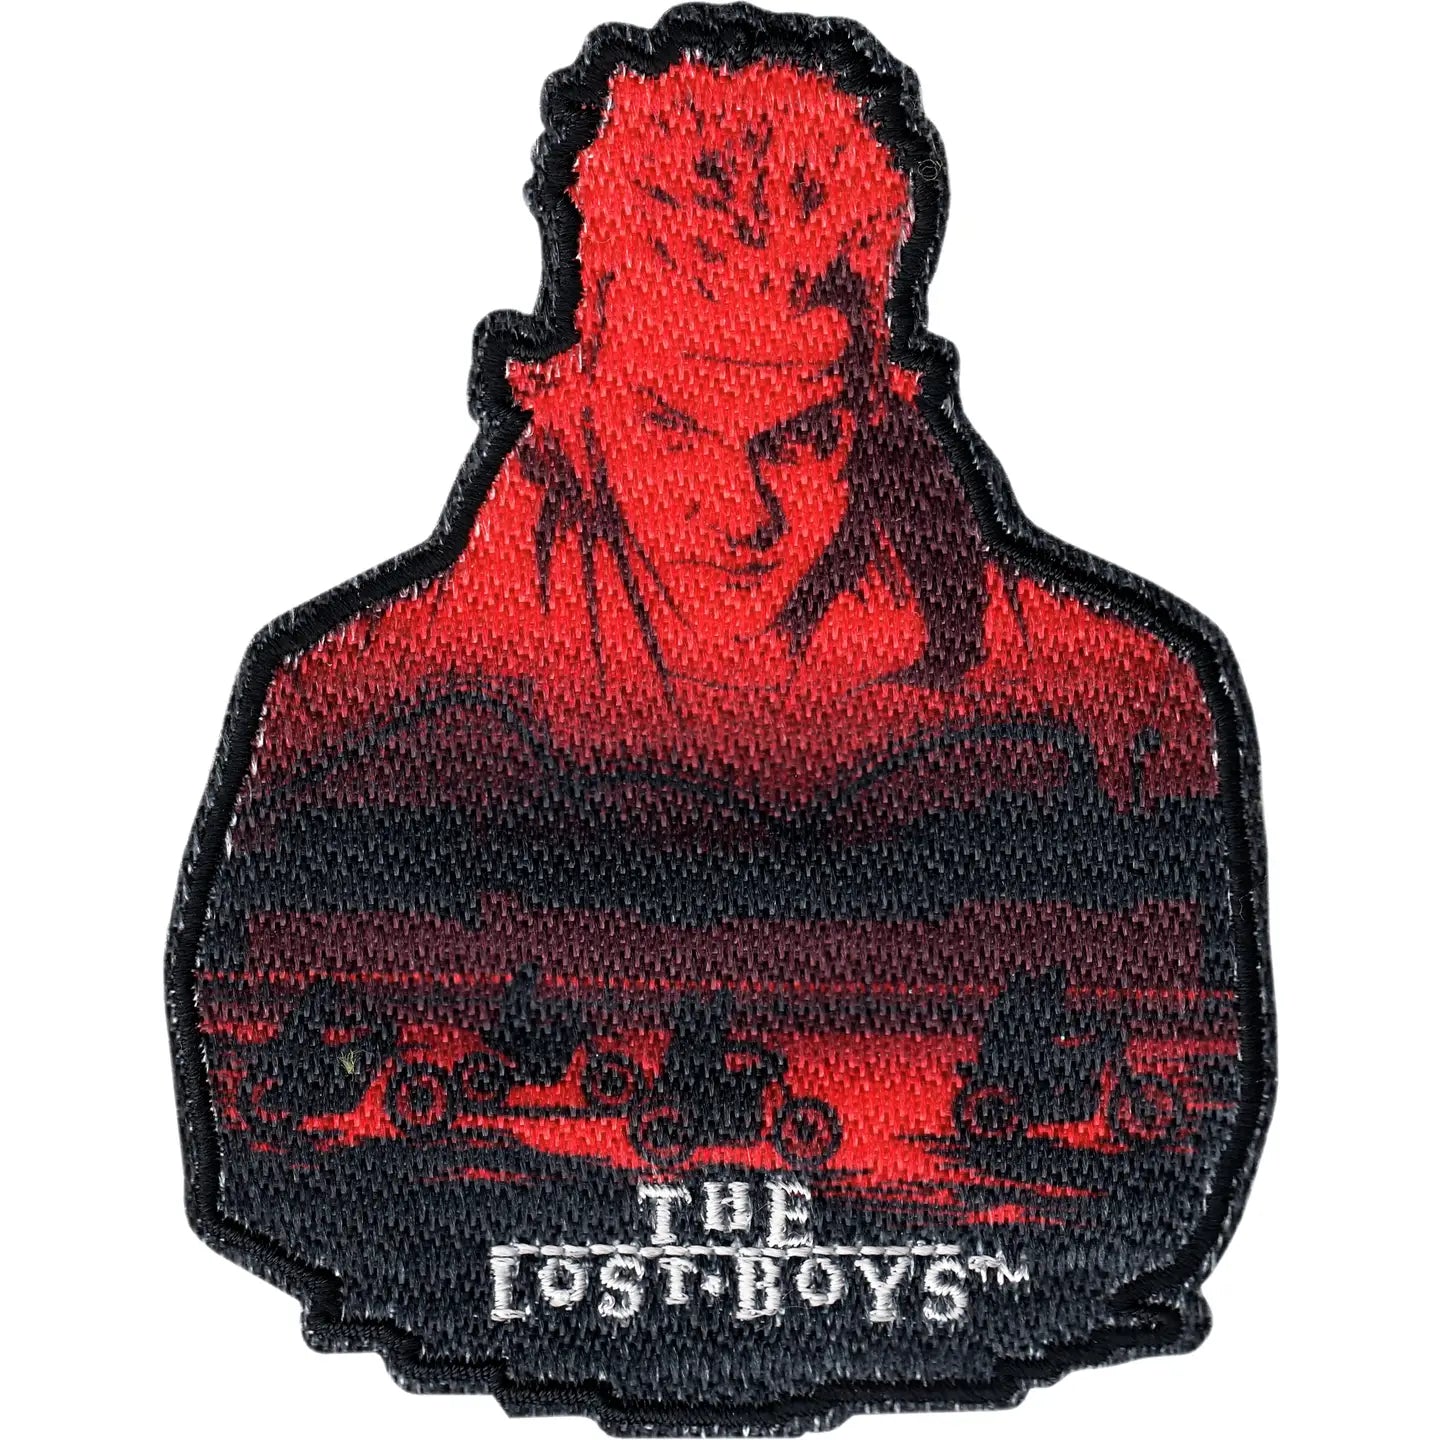 LOST BOYS PATCH